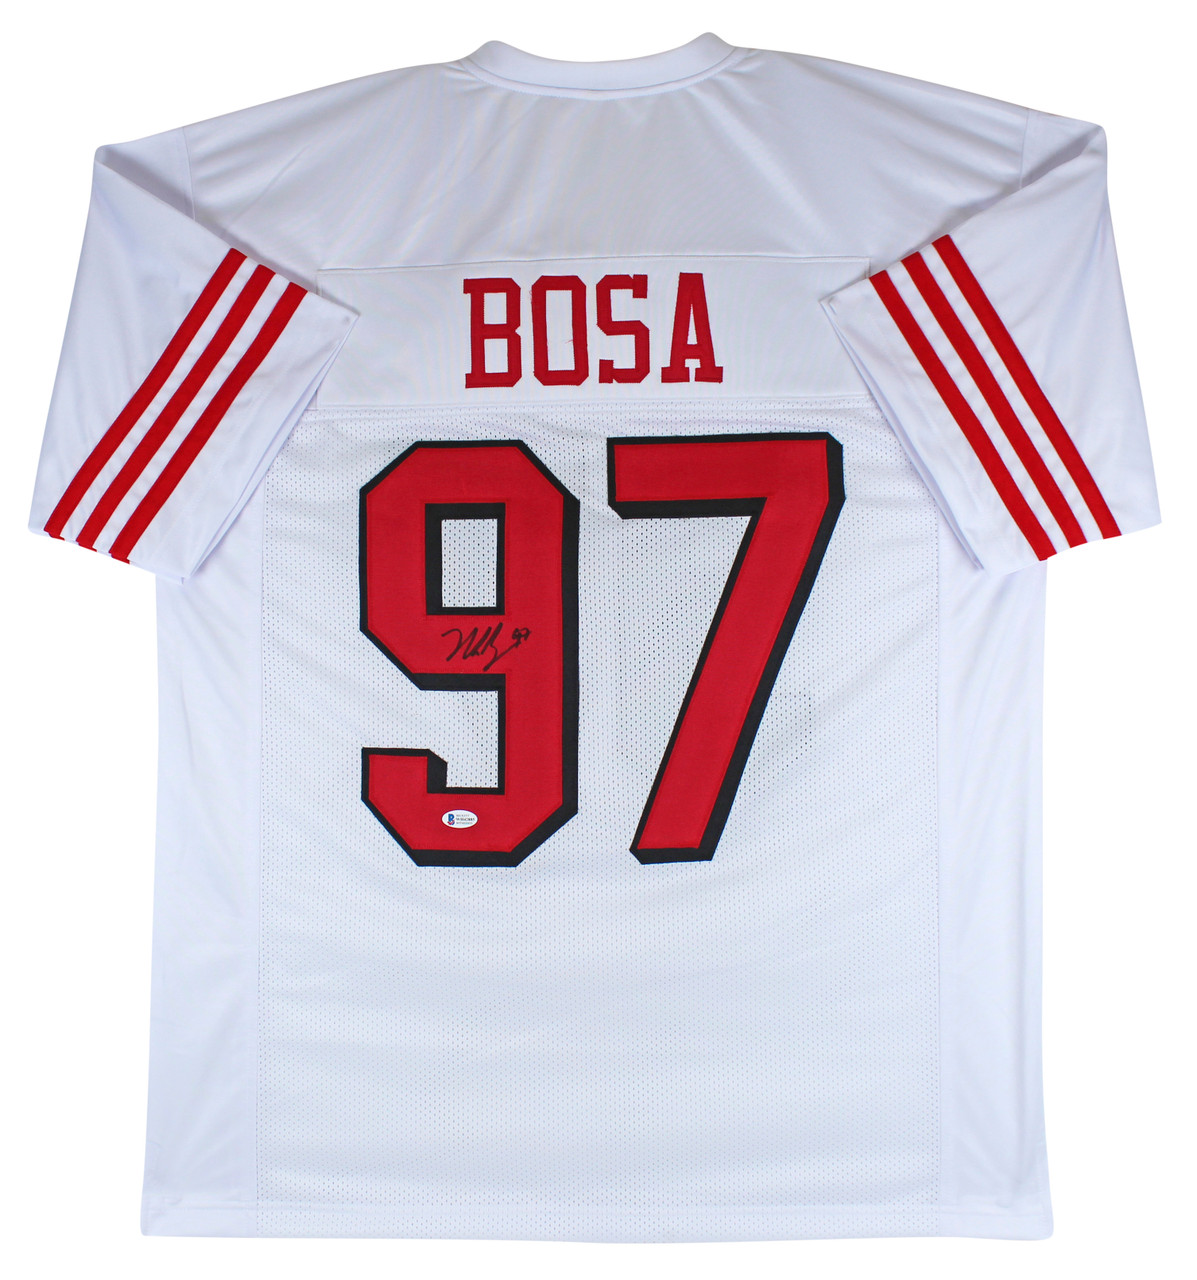 Military San Francisco 49ers “Nick Bosa” Jersey for Sale in